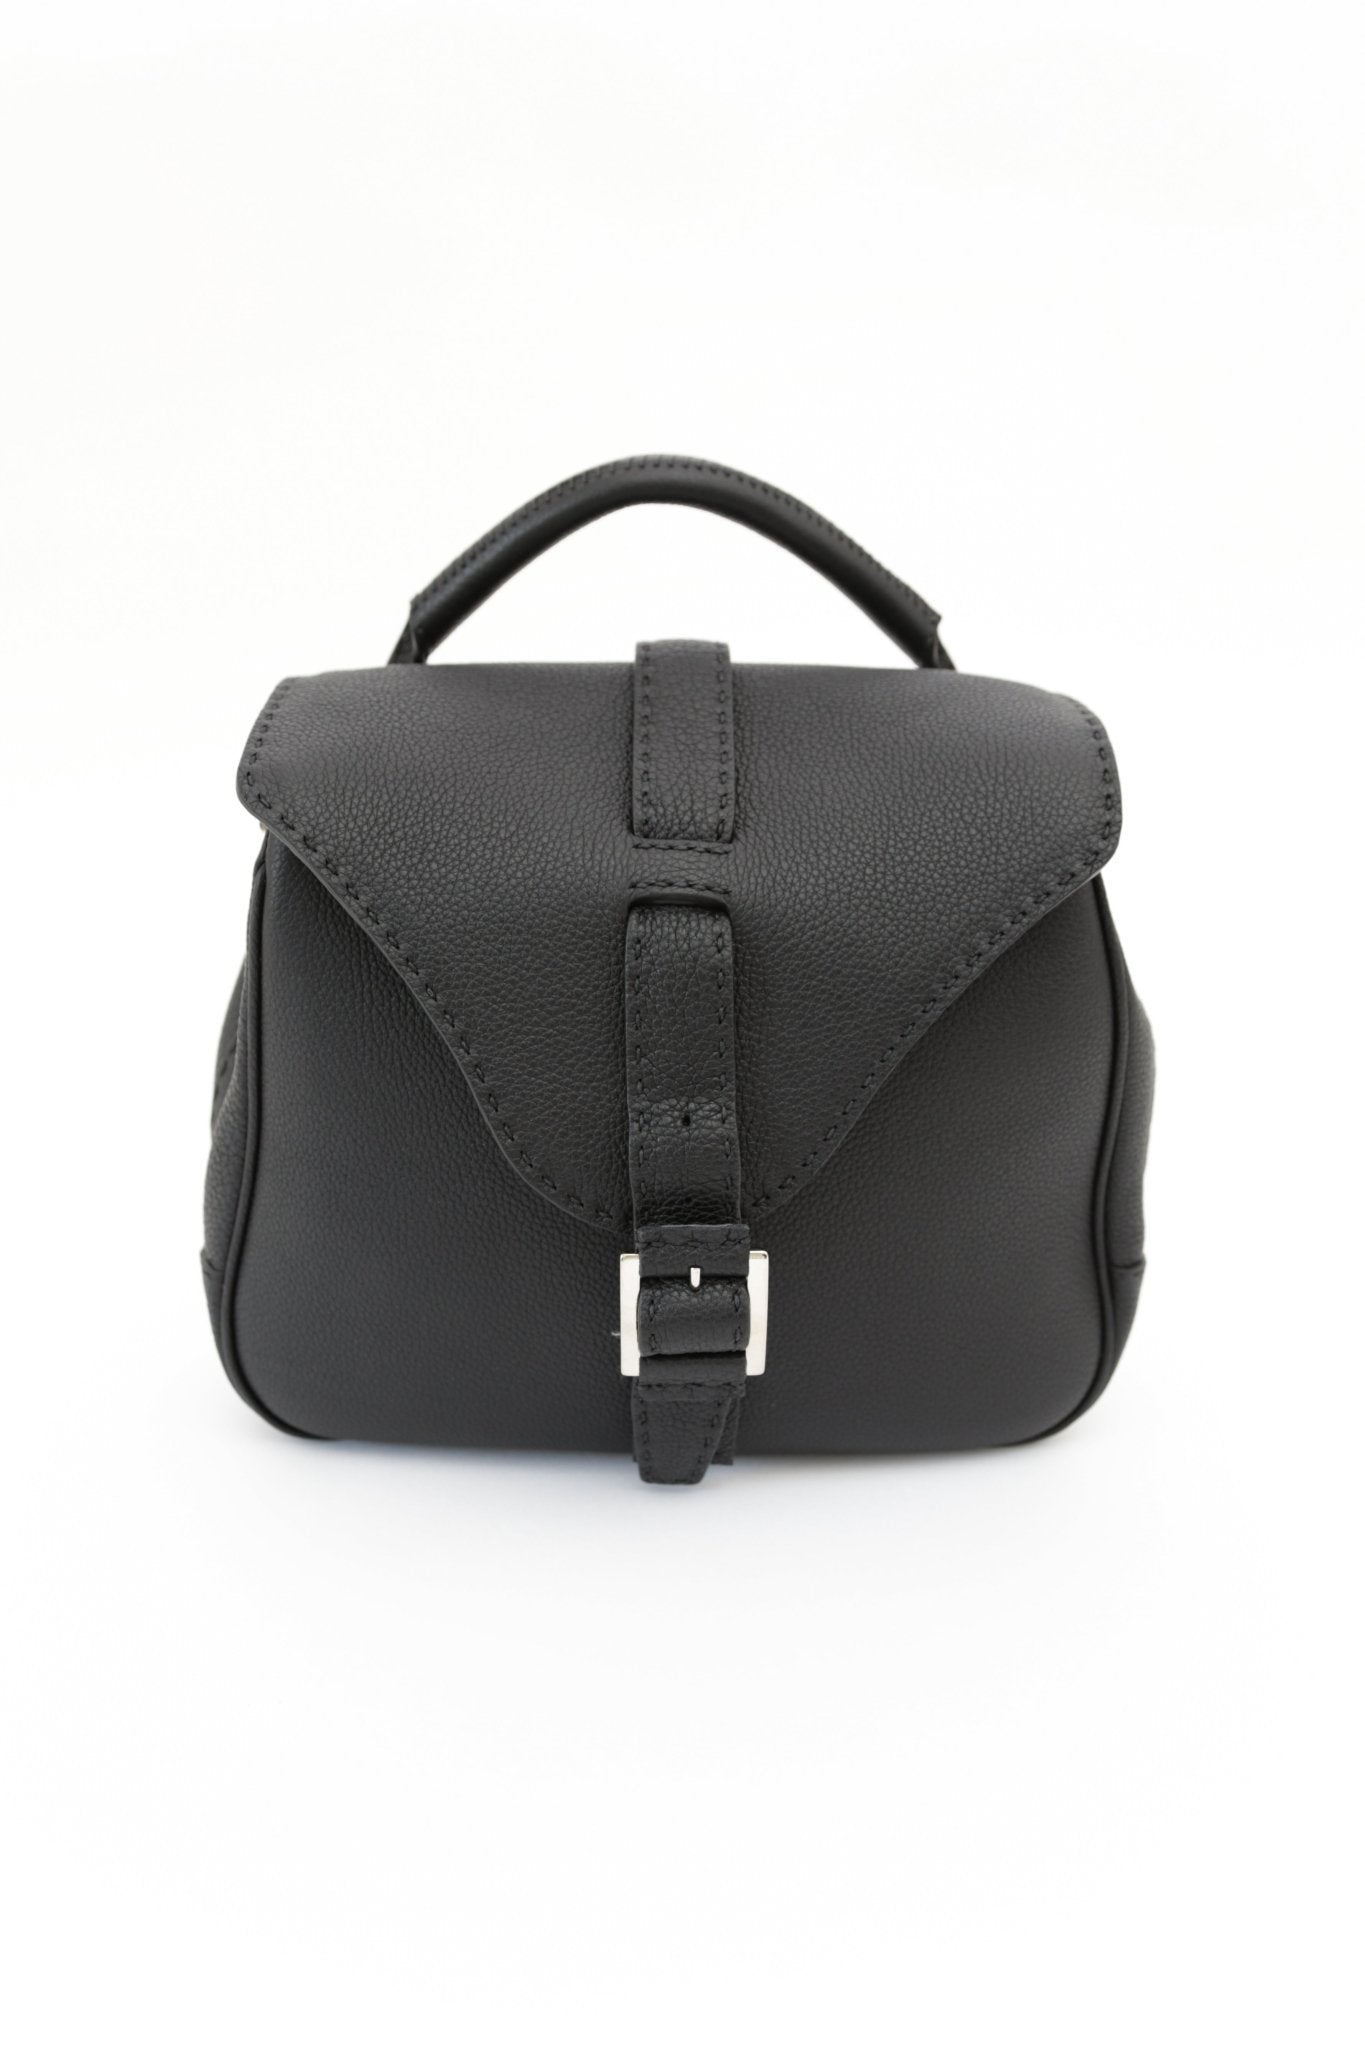 VALENCE BAG IN FRENCH LEATHER - Jarbo